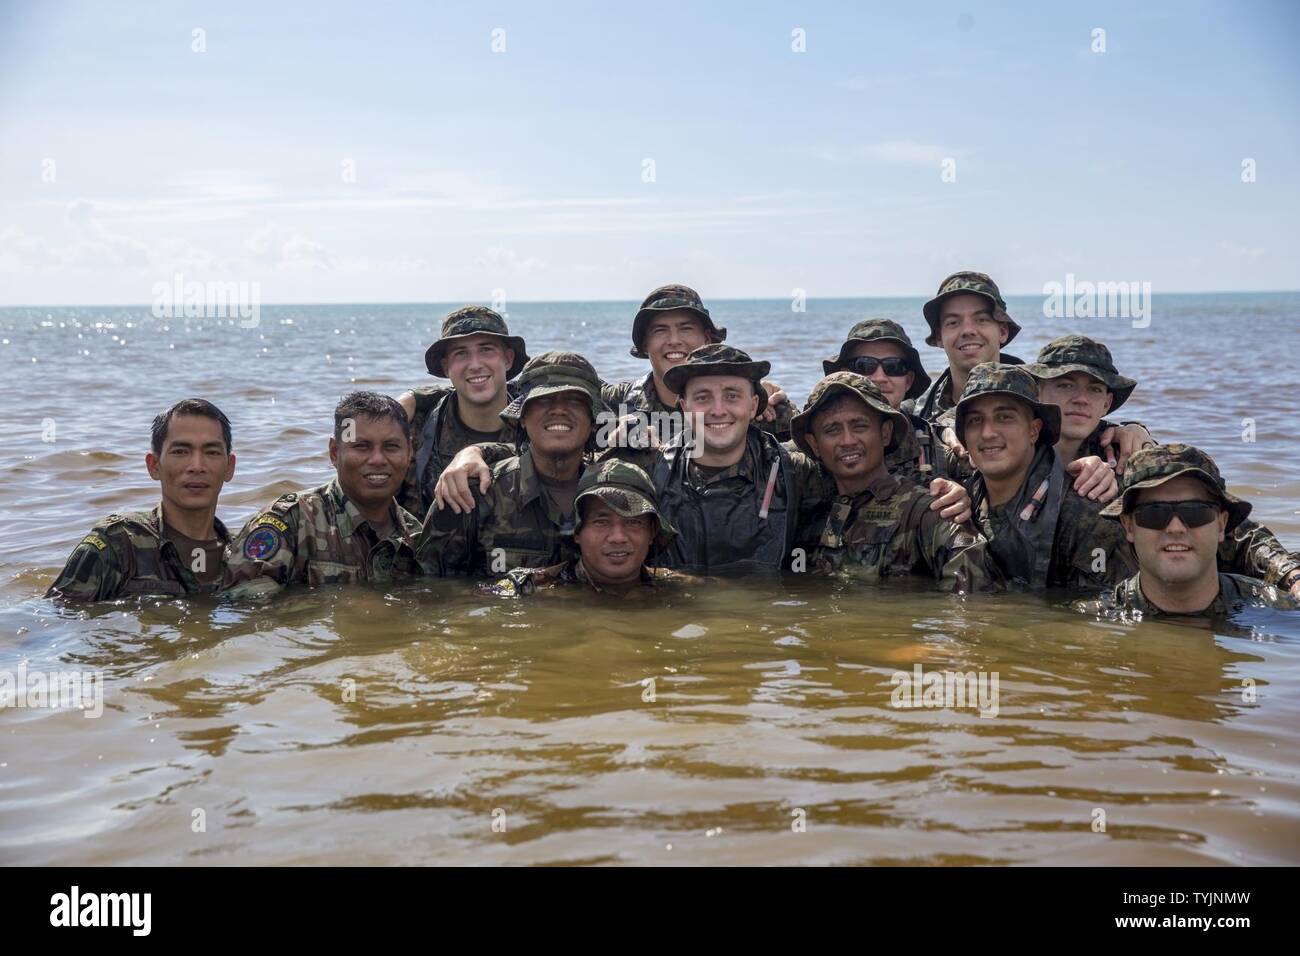 SABAH PROVINCE, Malaysia (Nov. 12, 2016) U.S. Marines and Malaysian Sailors pose for a picture during combat rubber raid craft usage training during Exercise Tiger Strike 16, in the Sabah Province, Malaysia, Nov. 12, 2016. Tiger Strike 16 is an opportunity for Malaysia and the United States armed forces to strengthen military-to-military partnerships, and increases the ability of all participants to plan, communicate and execute amphibious operations. The Marines are with the 11th Marine Expeditionary Unit’s Maritime Raid Force and the Sailors are with Malaysian Naval Special Warfare Forces. Stock Photo